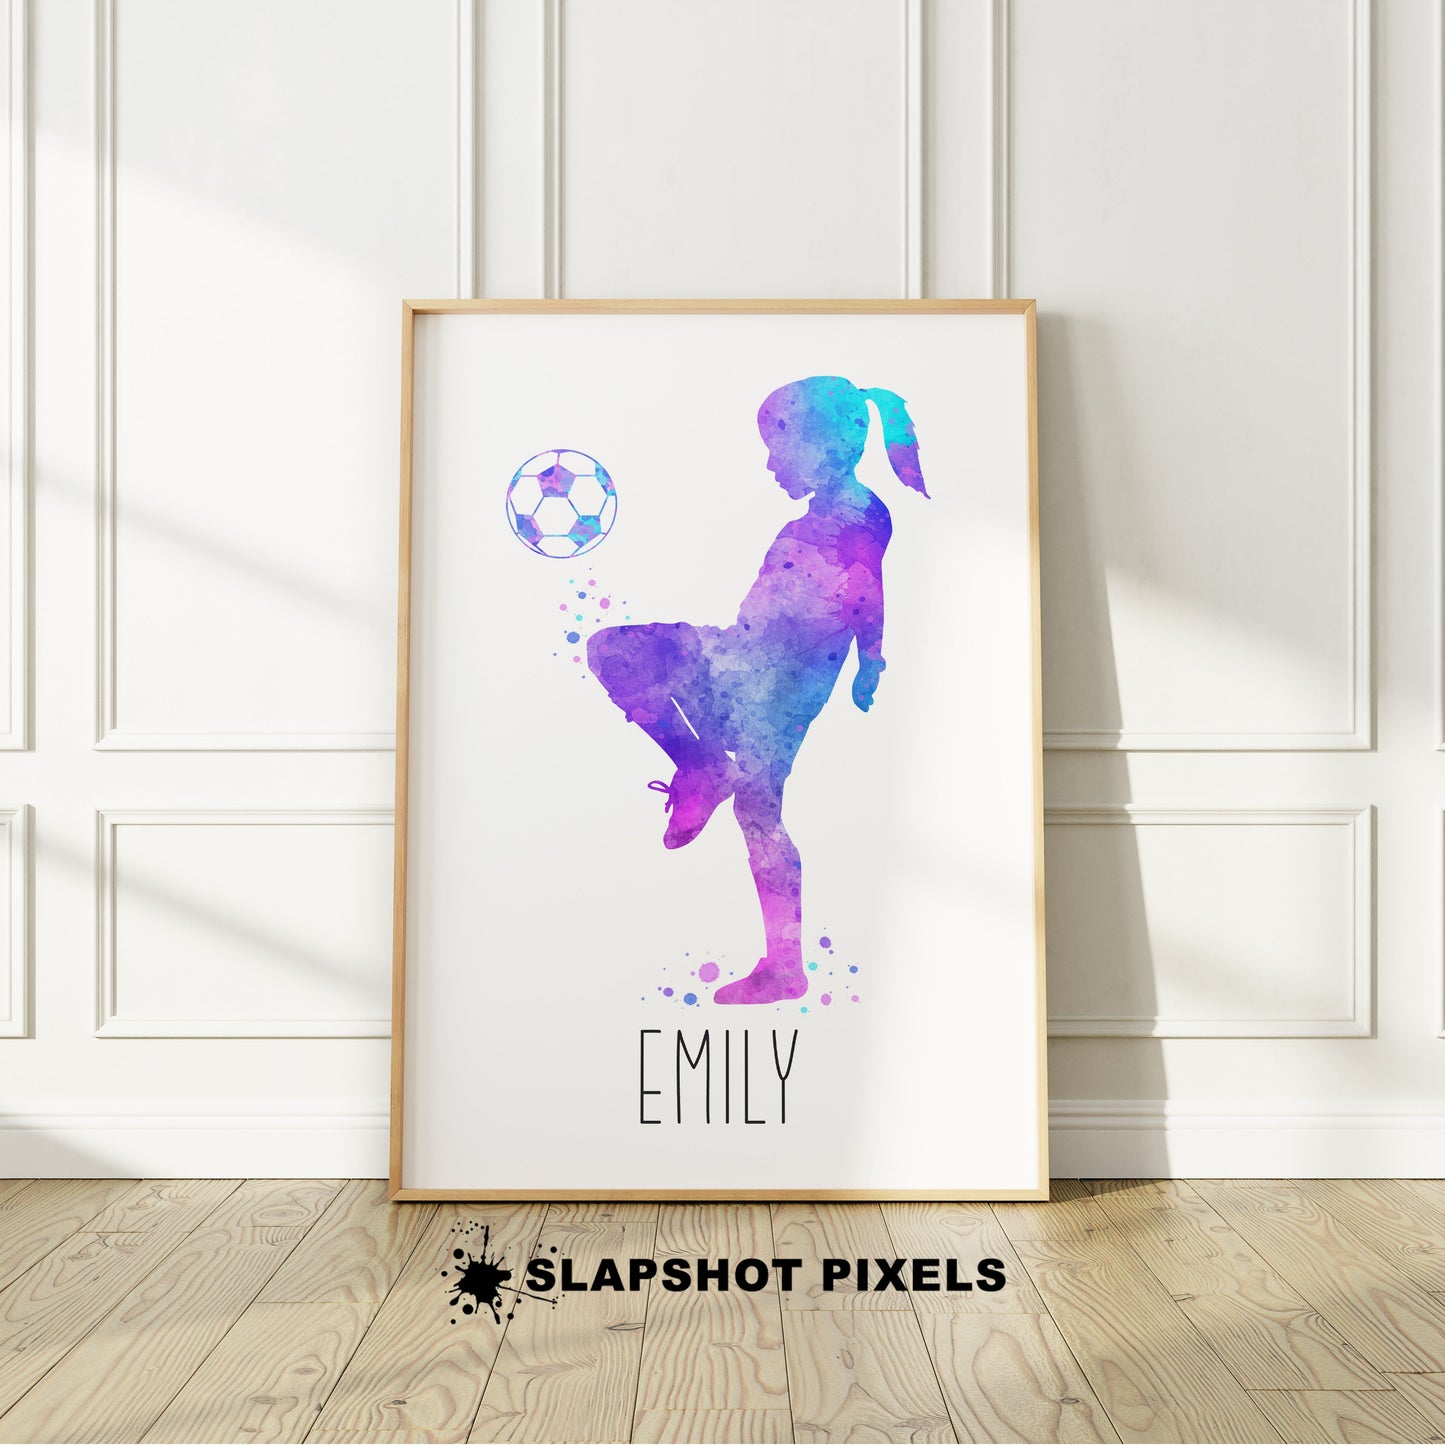 Personalized soccer poster of a girl soccer player bouncing soccer ball on her knee and custom name under player. Perfect soccer gifts for girls, soccer team gifts, soccer coach gift, soccer wall art décor, football prints and soccer bedroom ideas and soccer birthday gifts for girls.